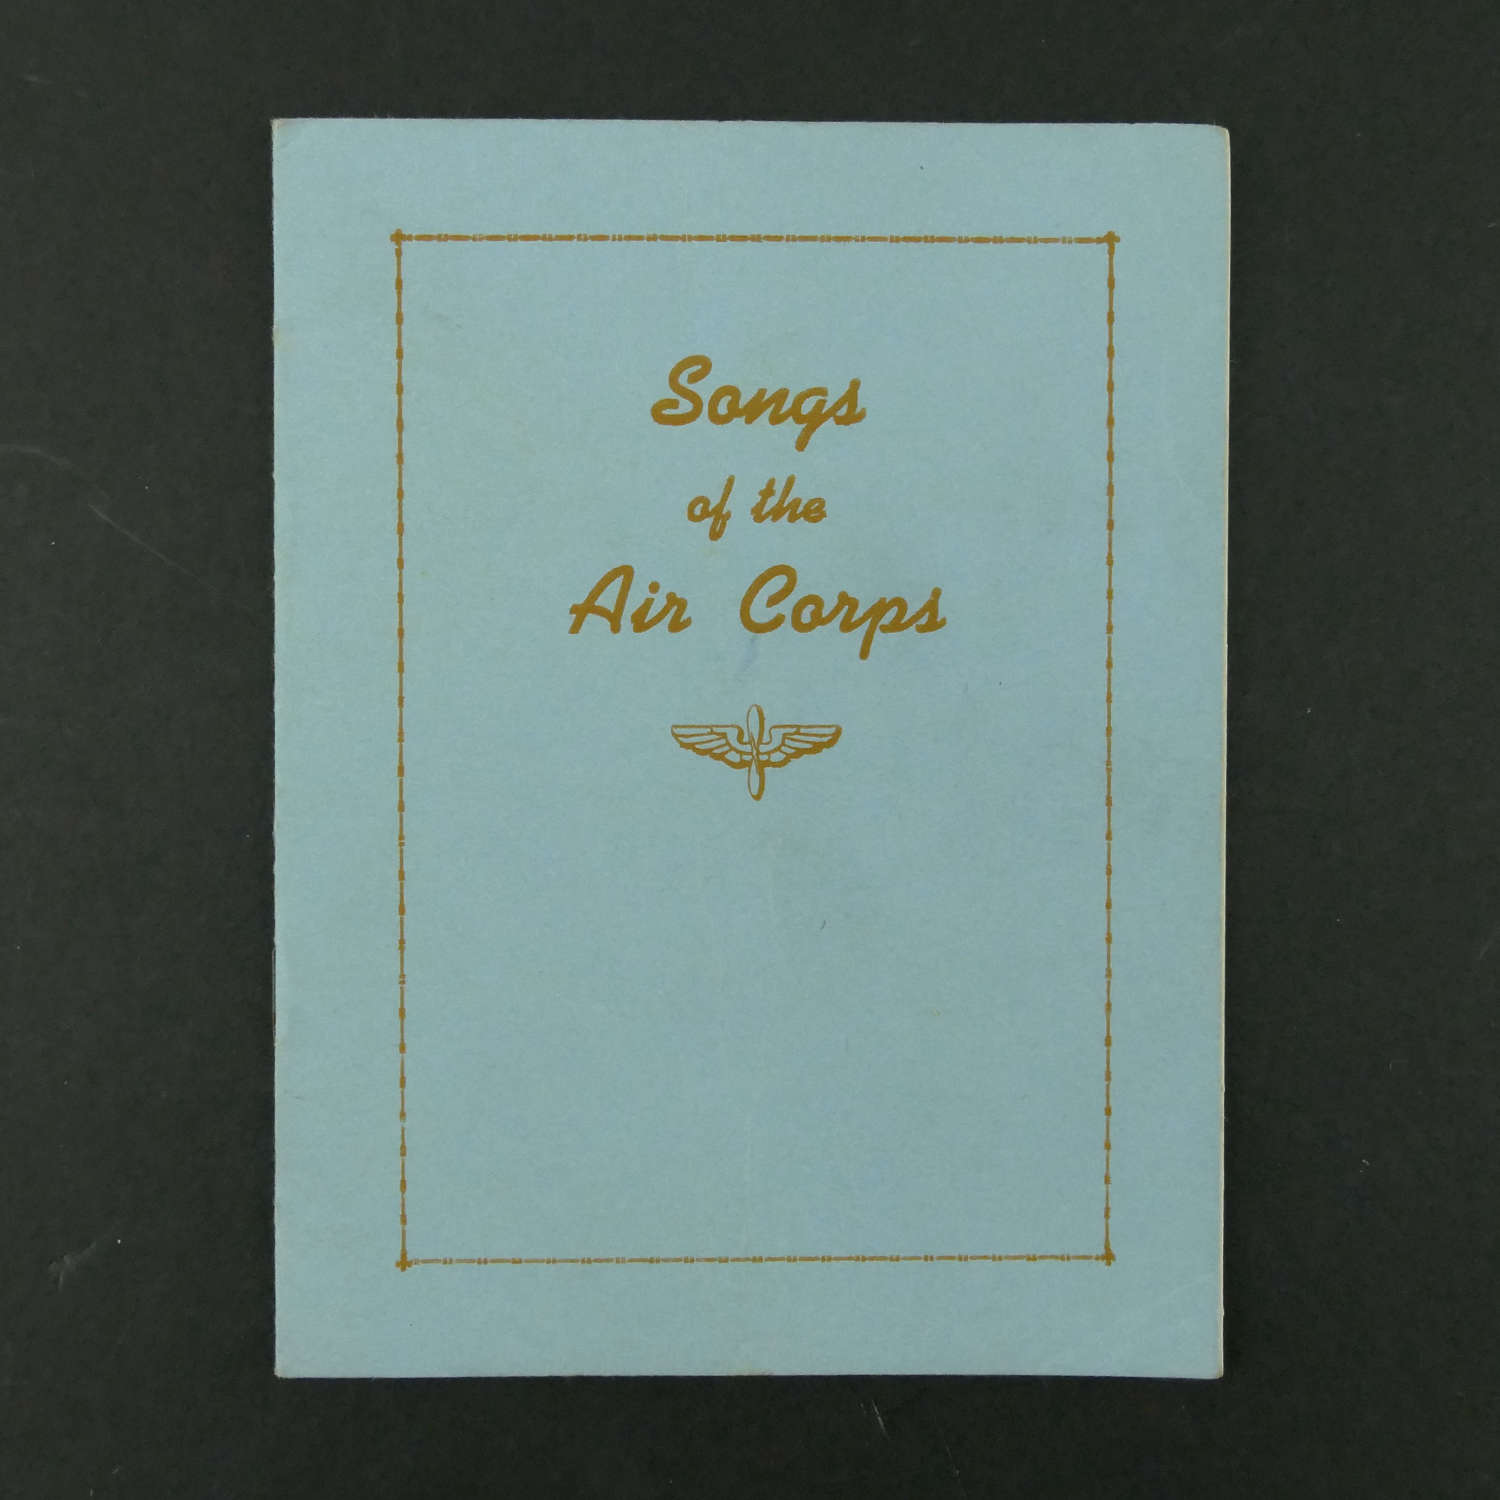 Songs of the Air Corps